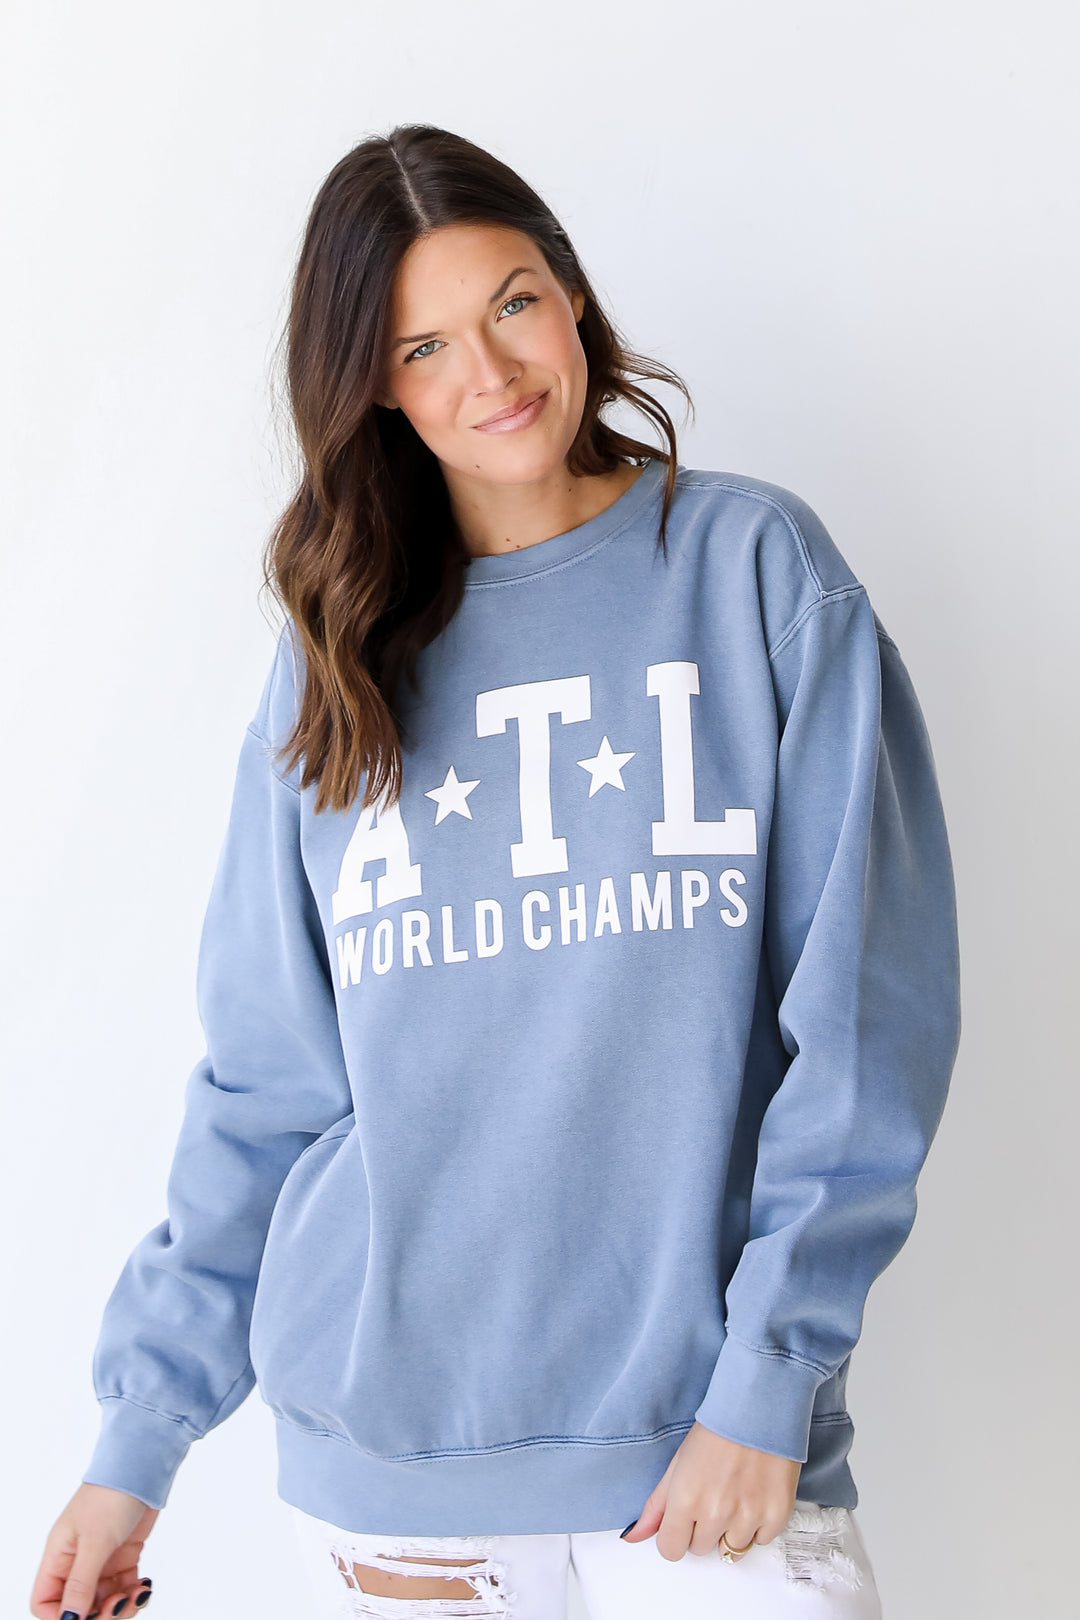 ATL World Champs Pullover front view